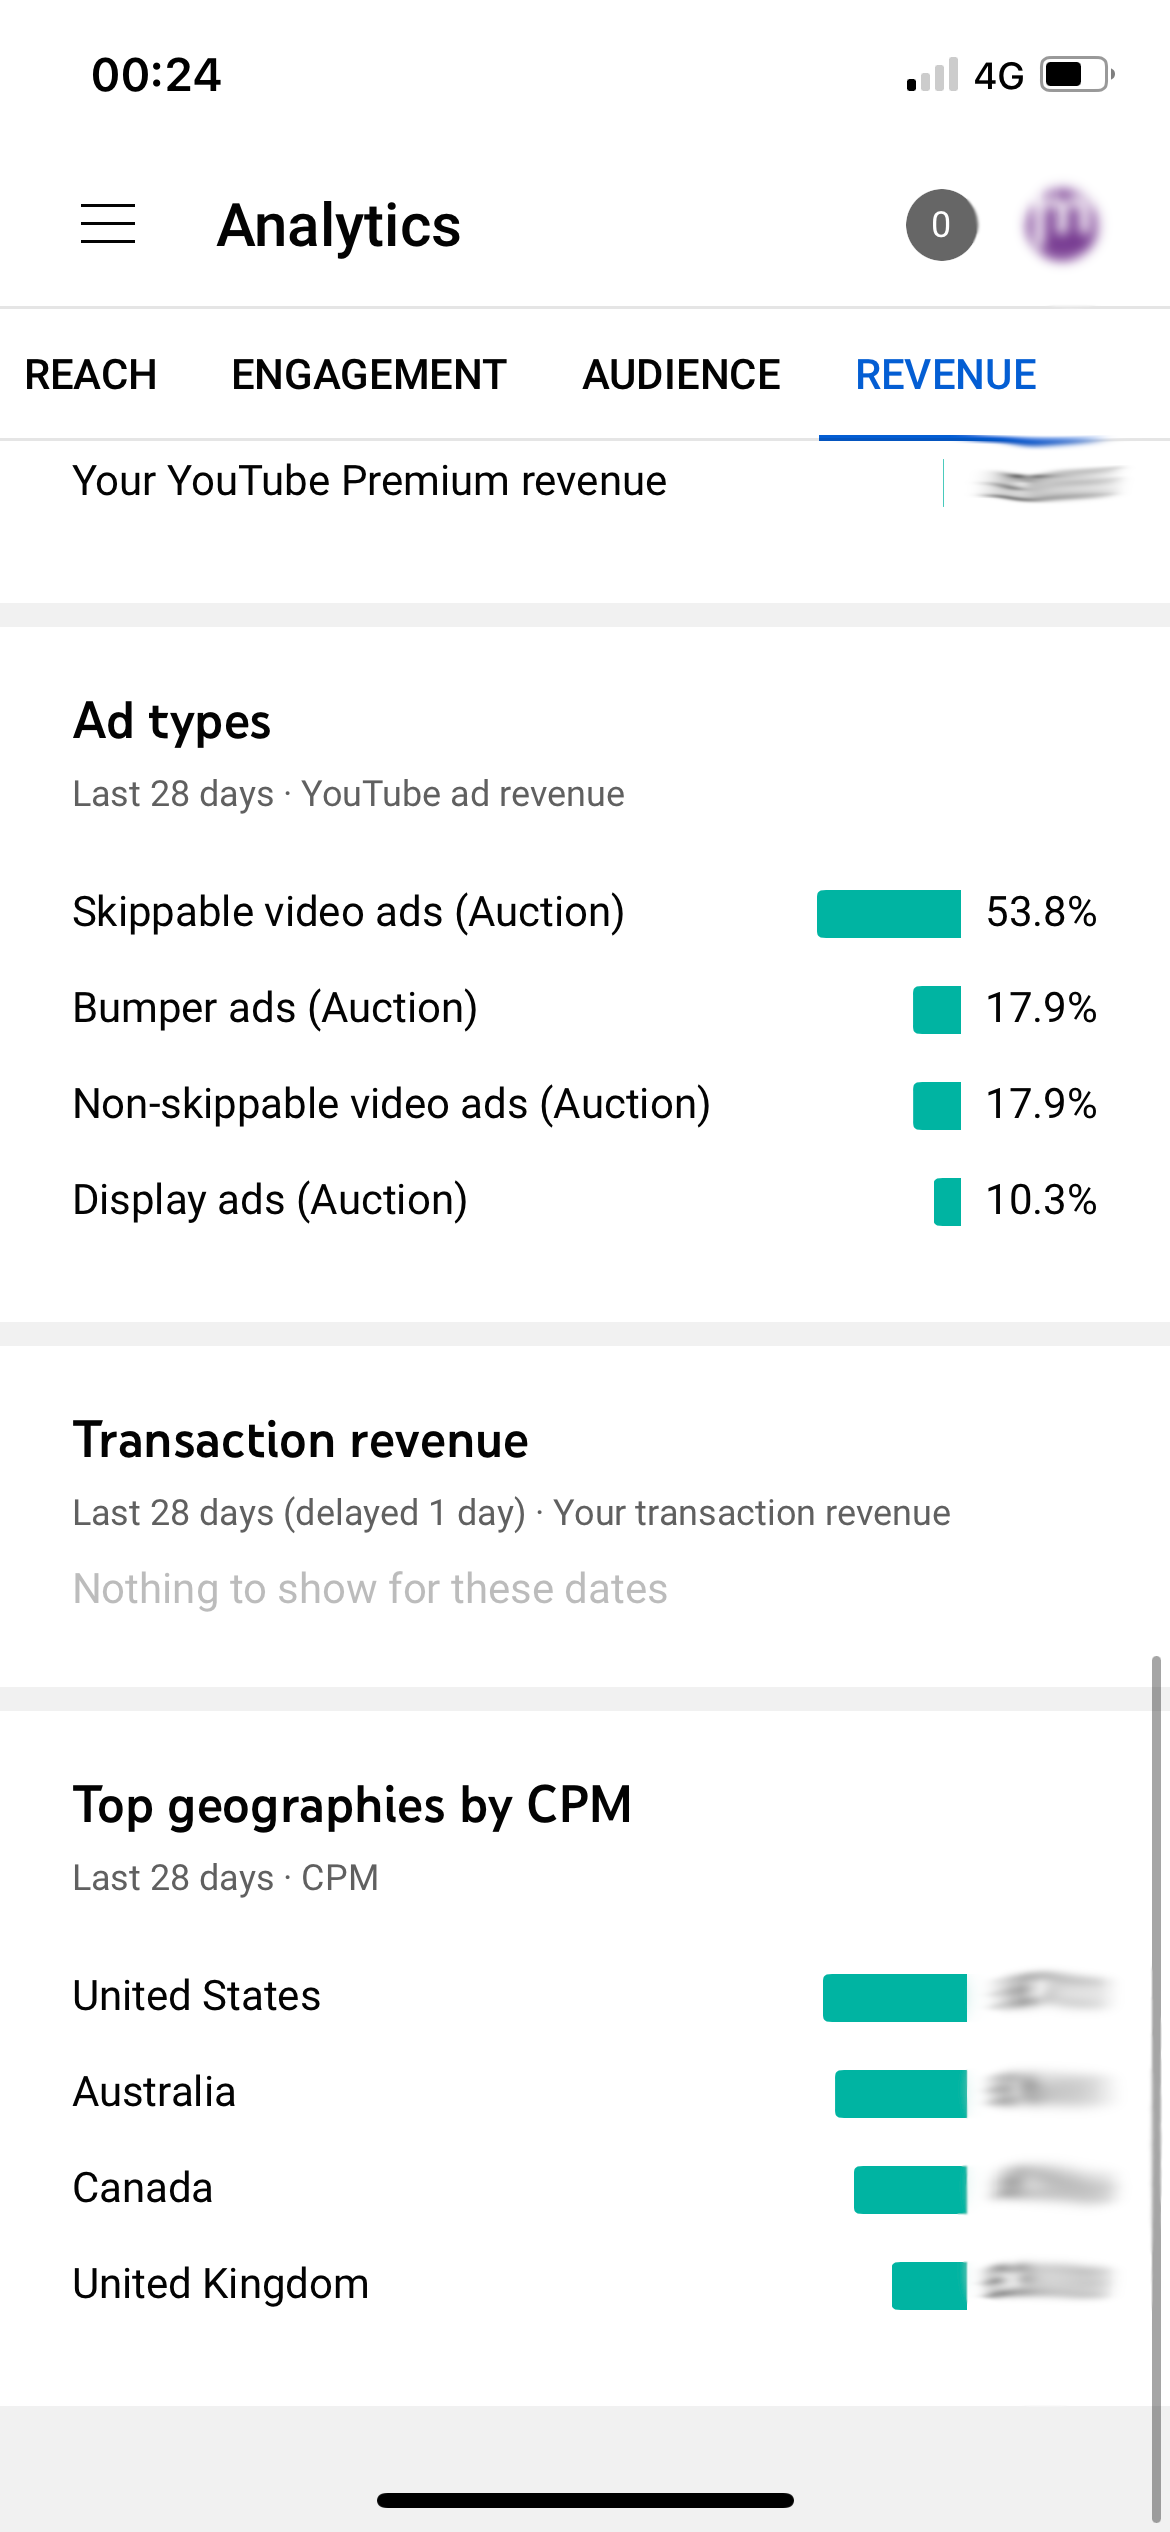 Youtube Studio App showing ad types & top geographies by CRM